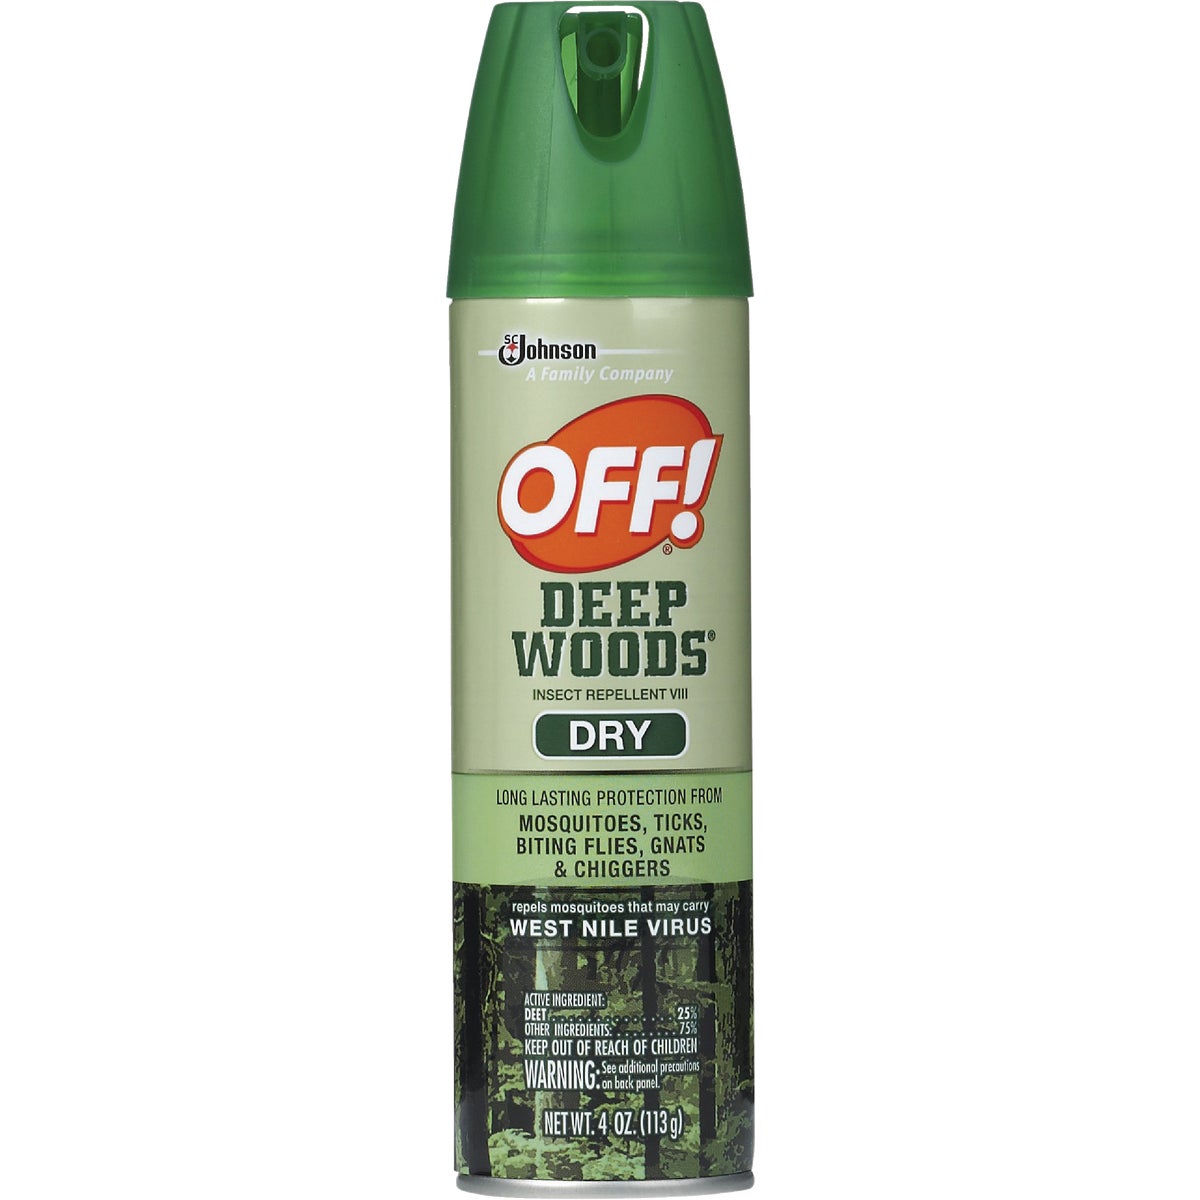 Deep Woods Off 4 Oz. Dry Insect Repellent Aerosol Spray